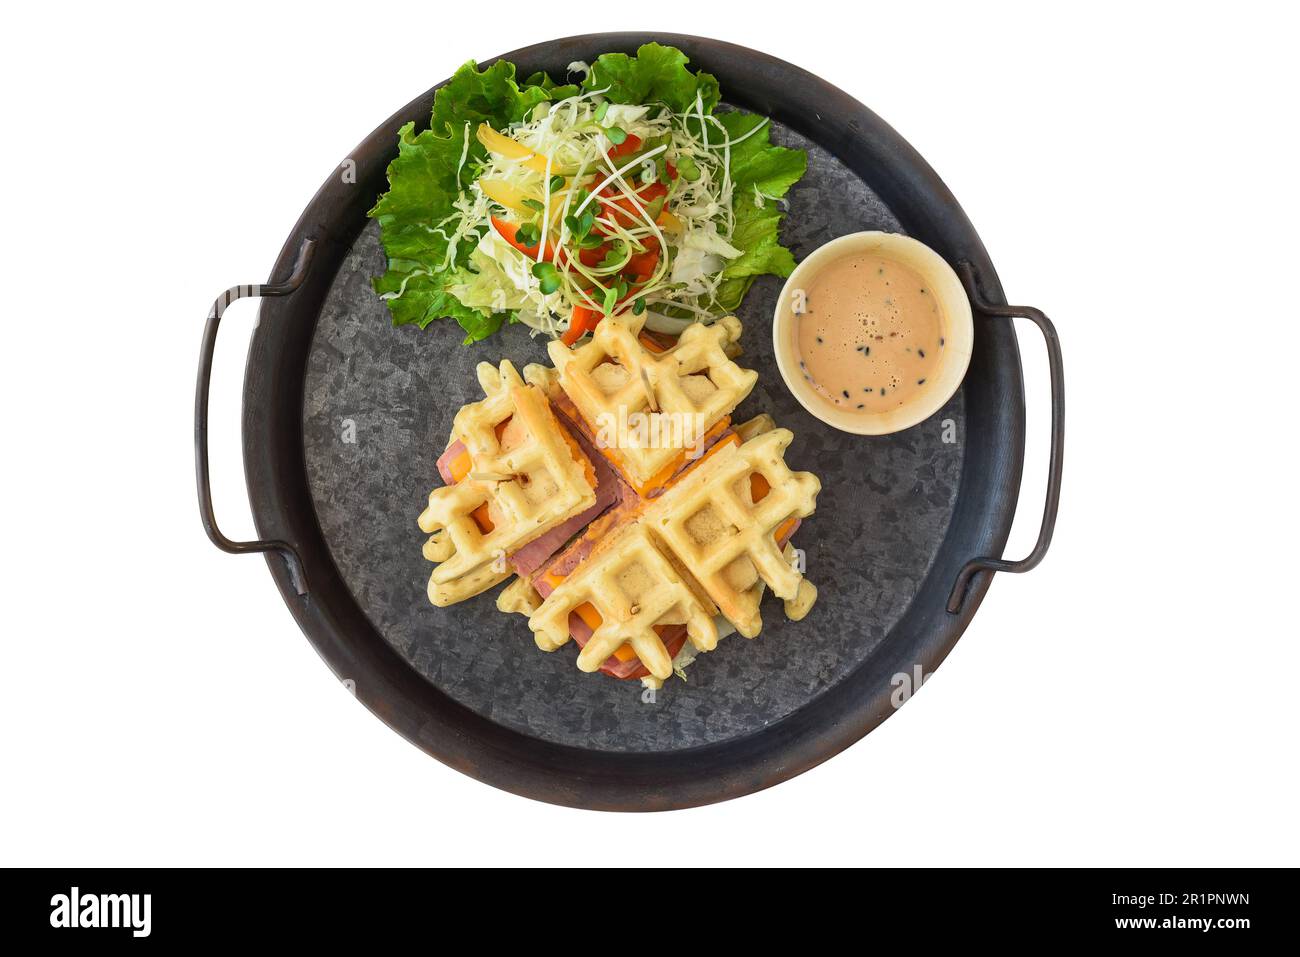 Belgian waffles on white plate with greens closeup Stock Photo